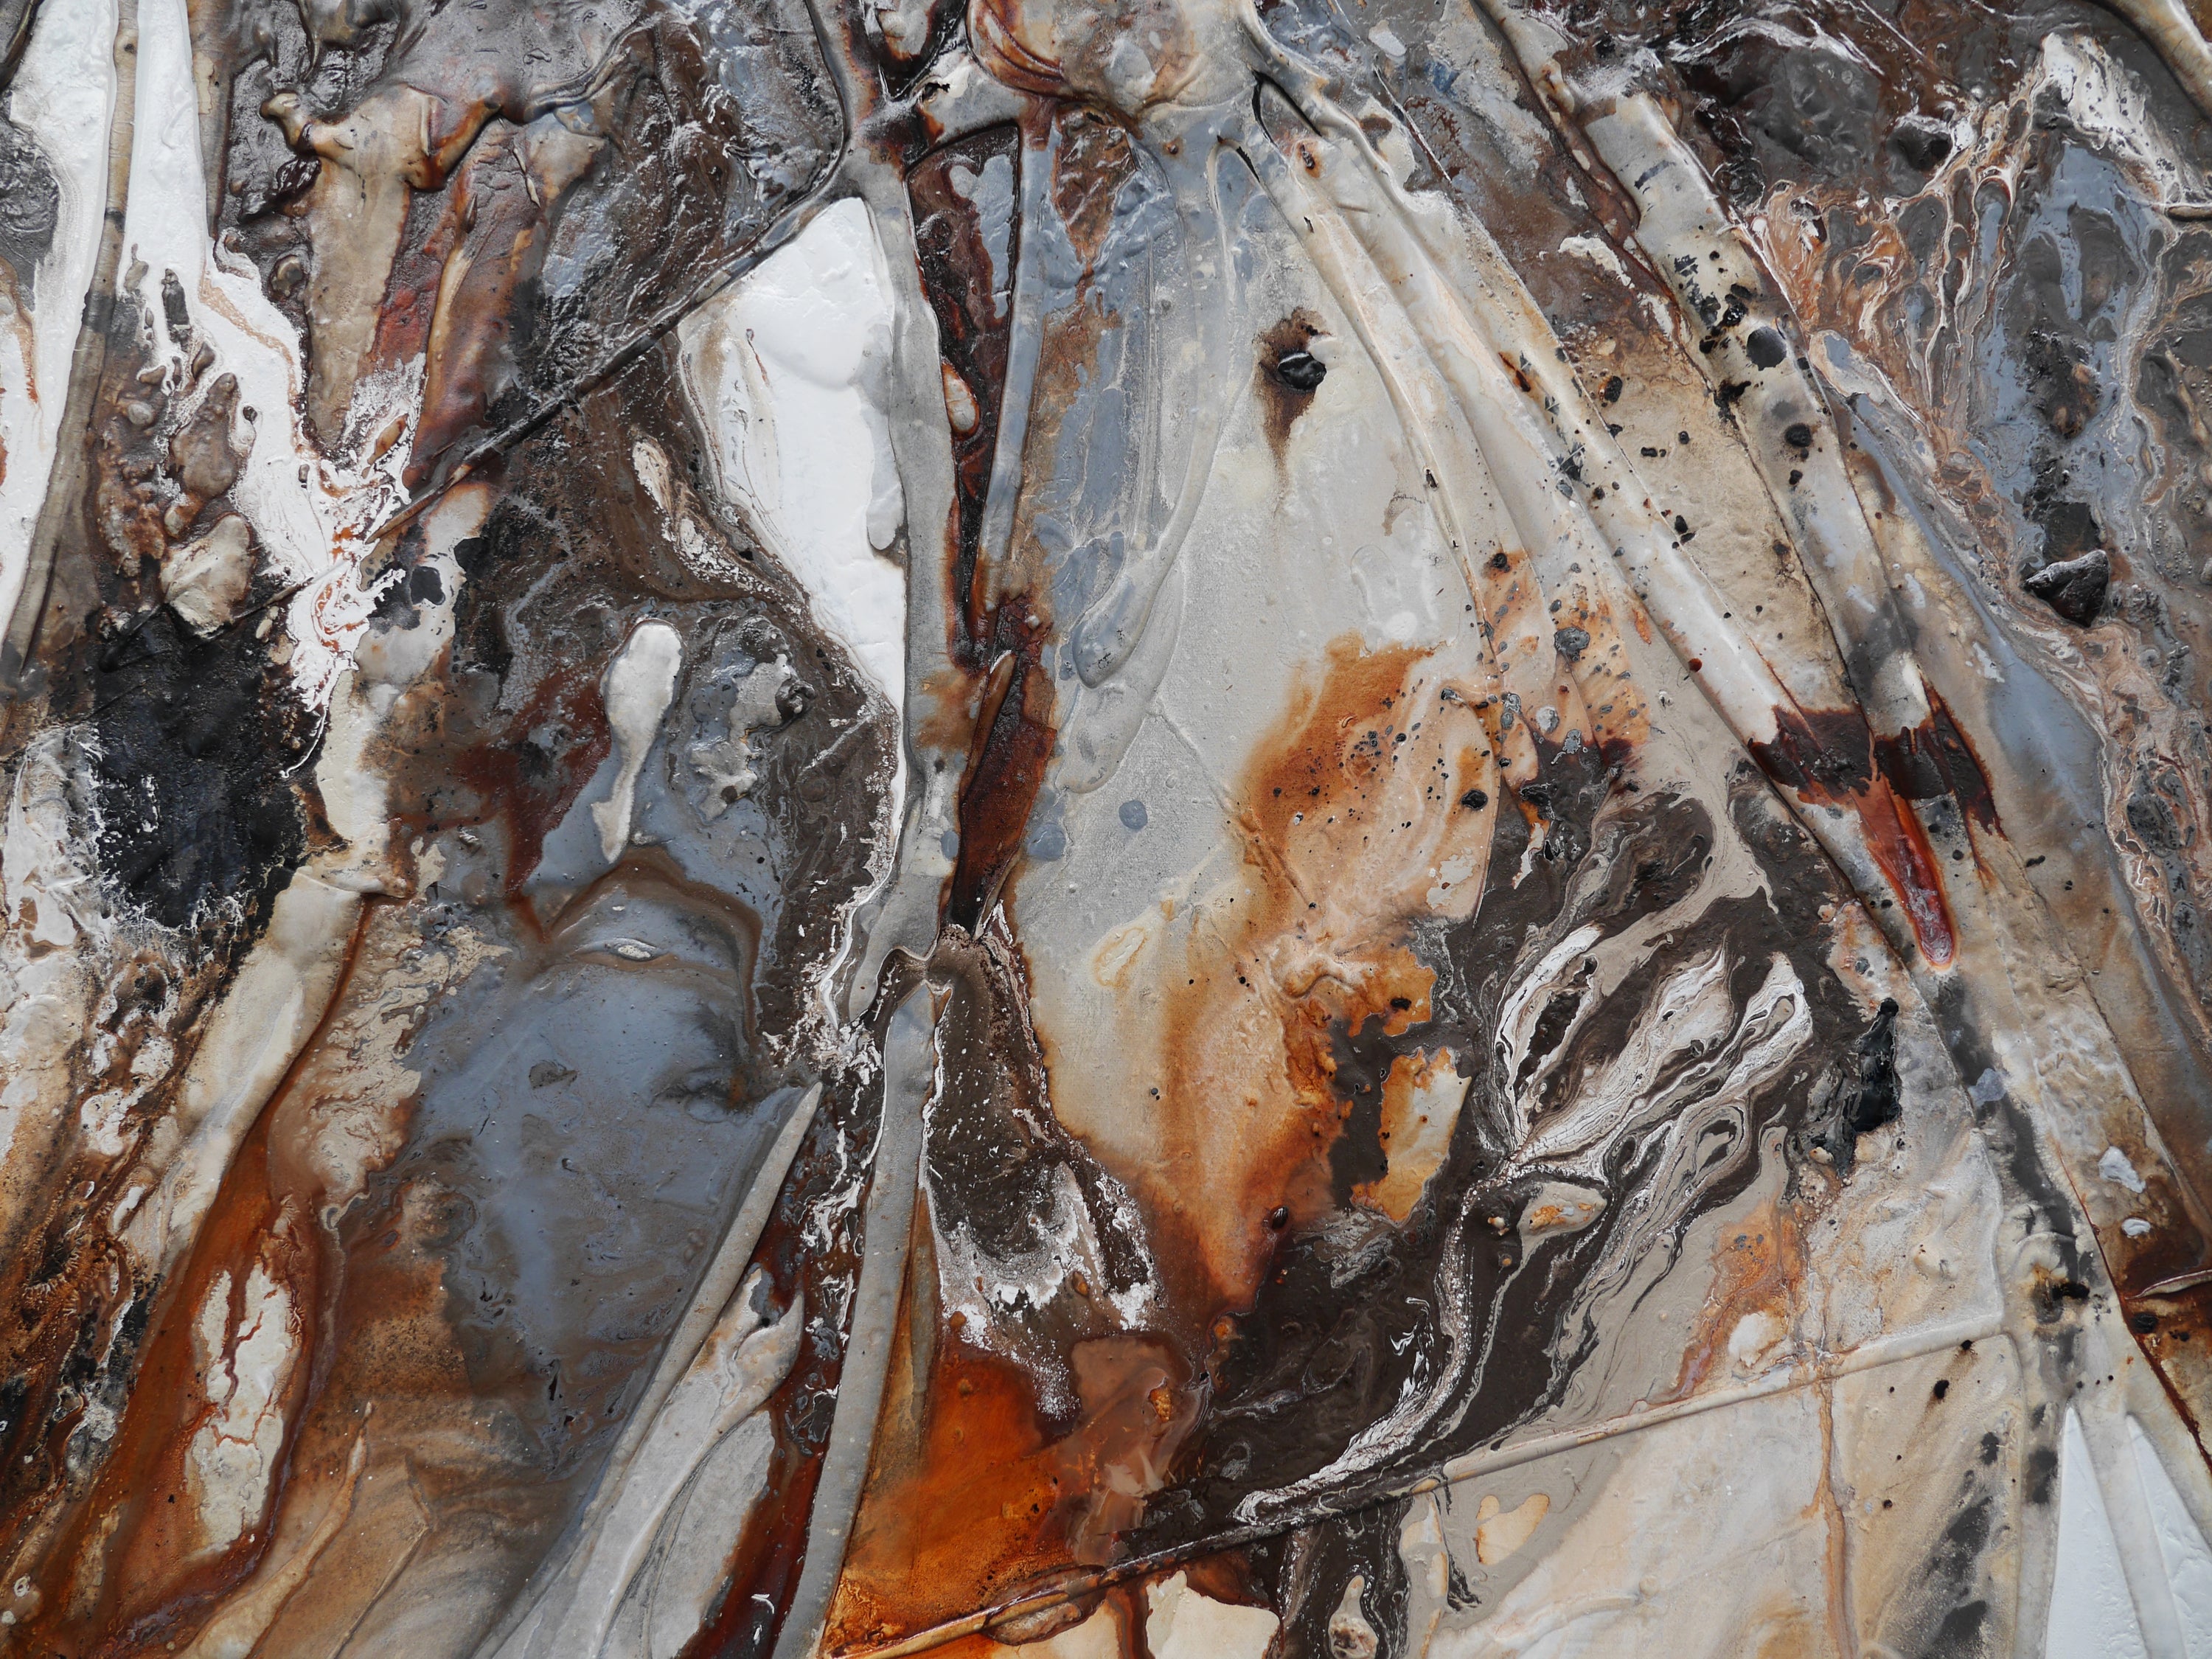 Nara Rust 150cm x 150cm White Oxide Textured Abstract Painting (SOLD)